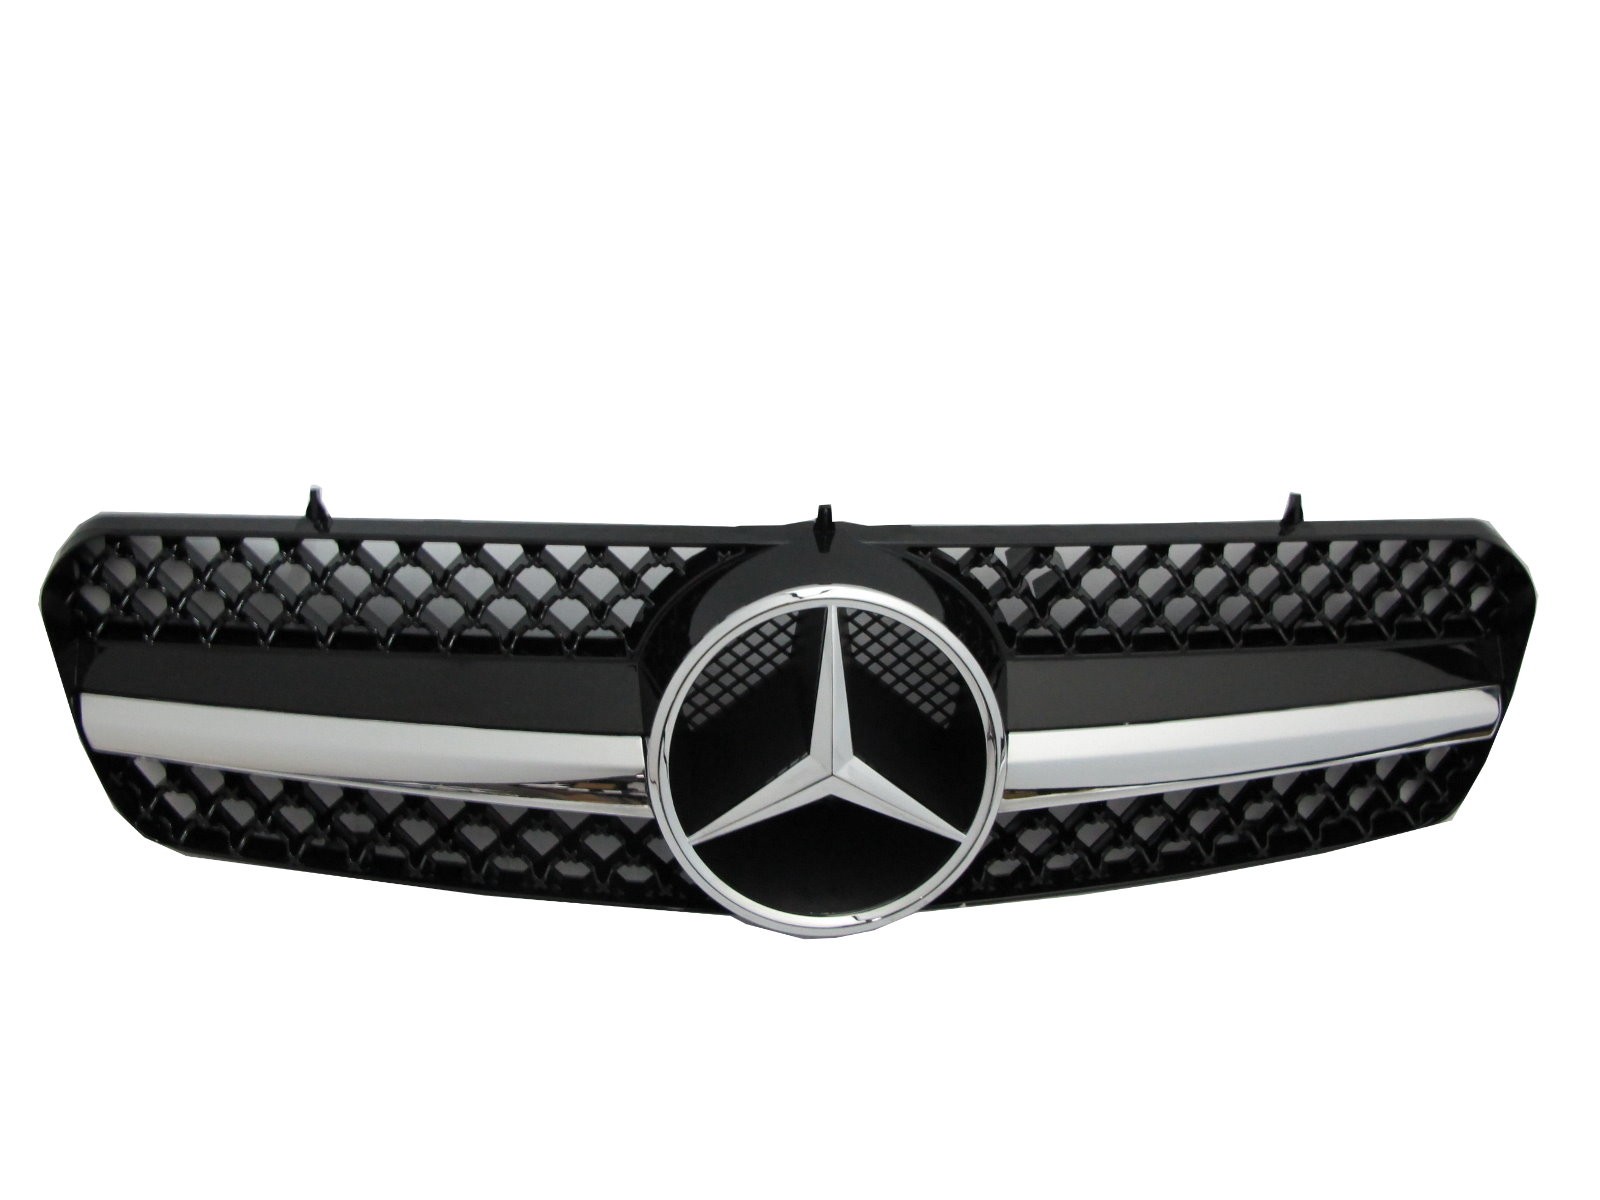 CrazyTheGod CL-CLASS W215/C215 2000-2005 Coupe 2D 1FIN GRILLE/GRILL Chrome/Black V2 for Mercedes-Benz